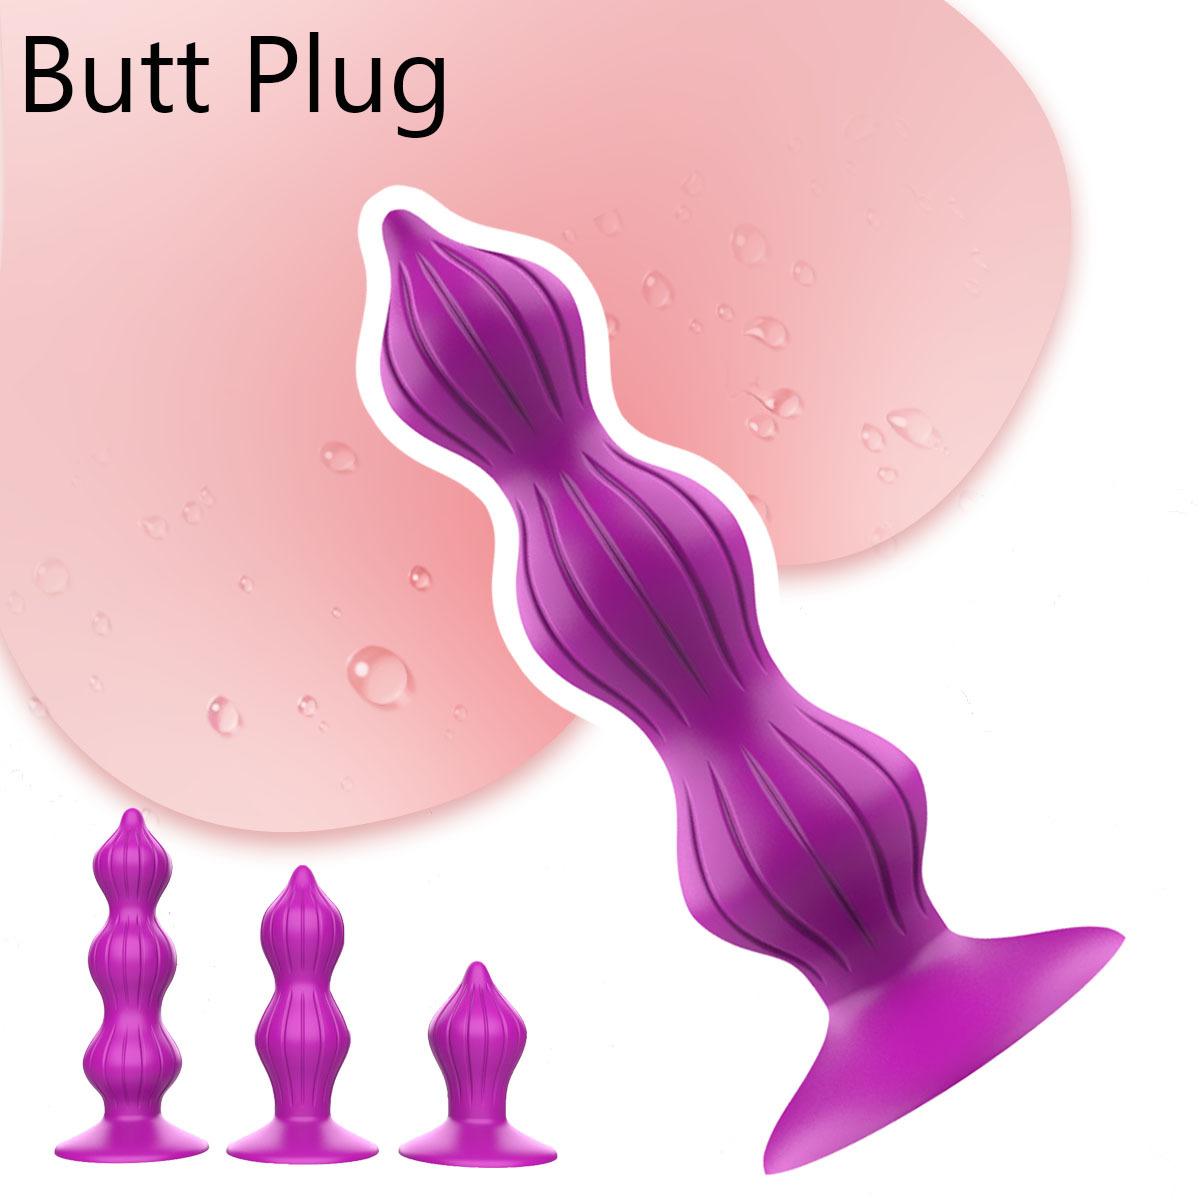 Single bead anal development tool with suction cup